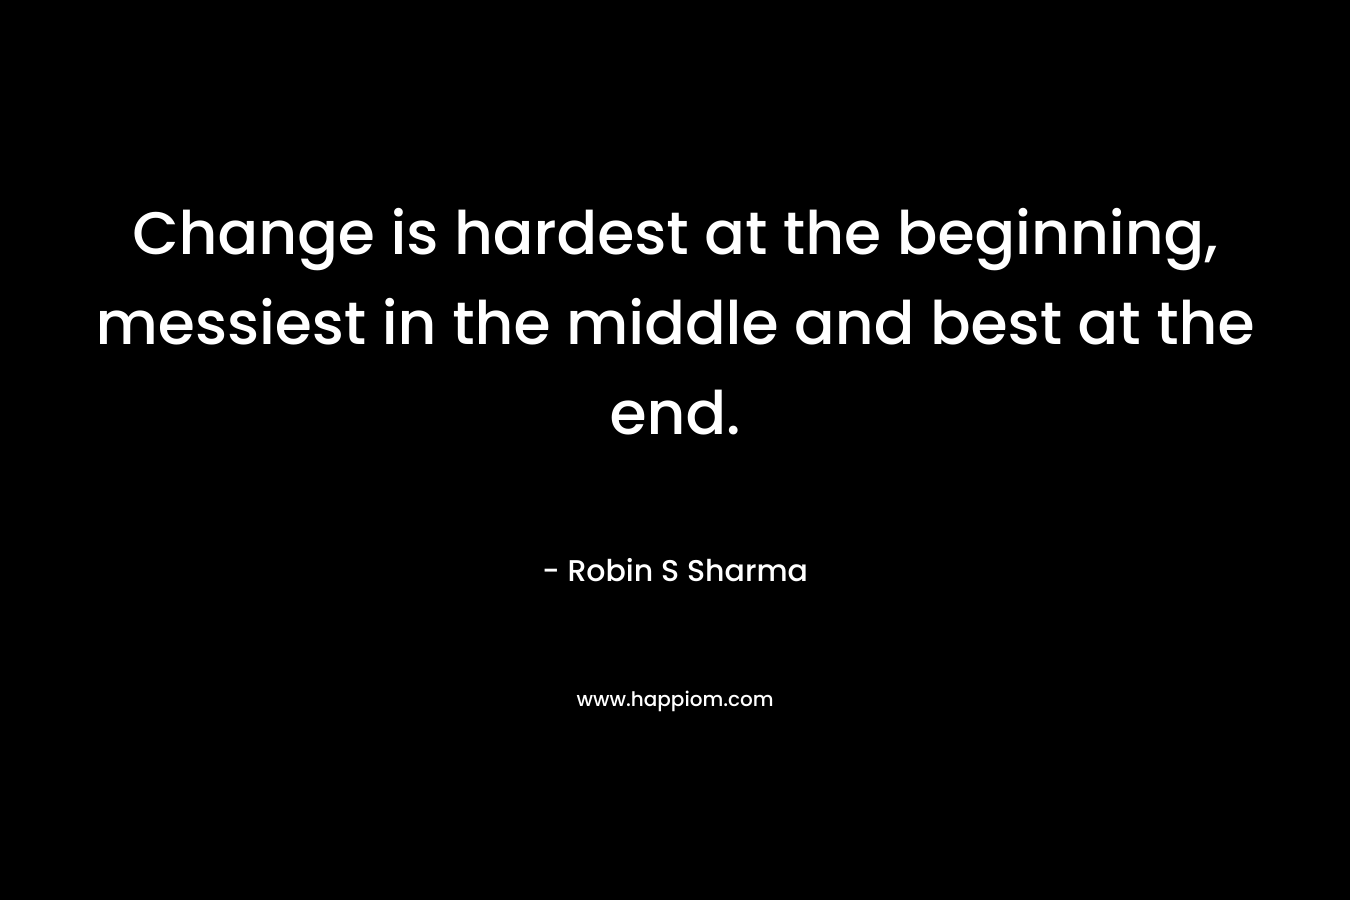 Change is hardest at the beginning, messiest in the middle and best at the end.